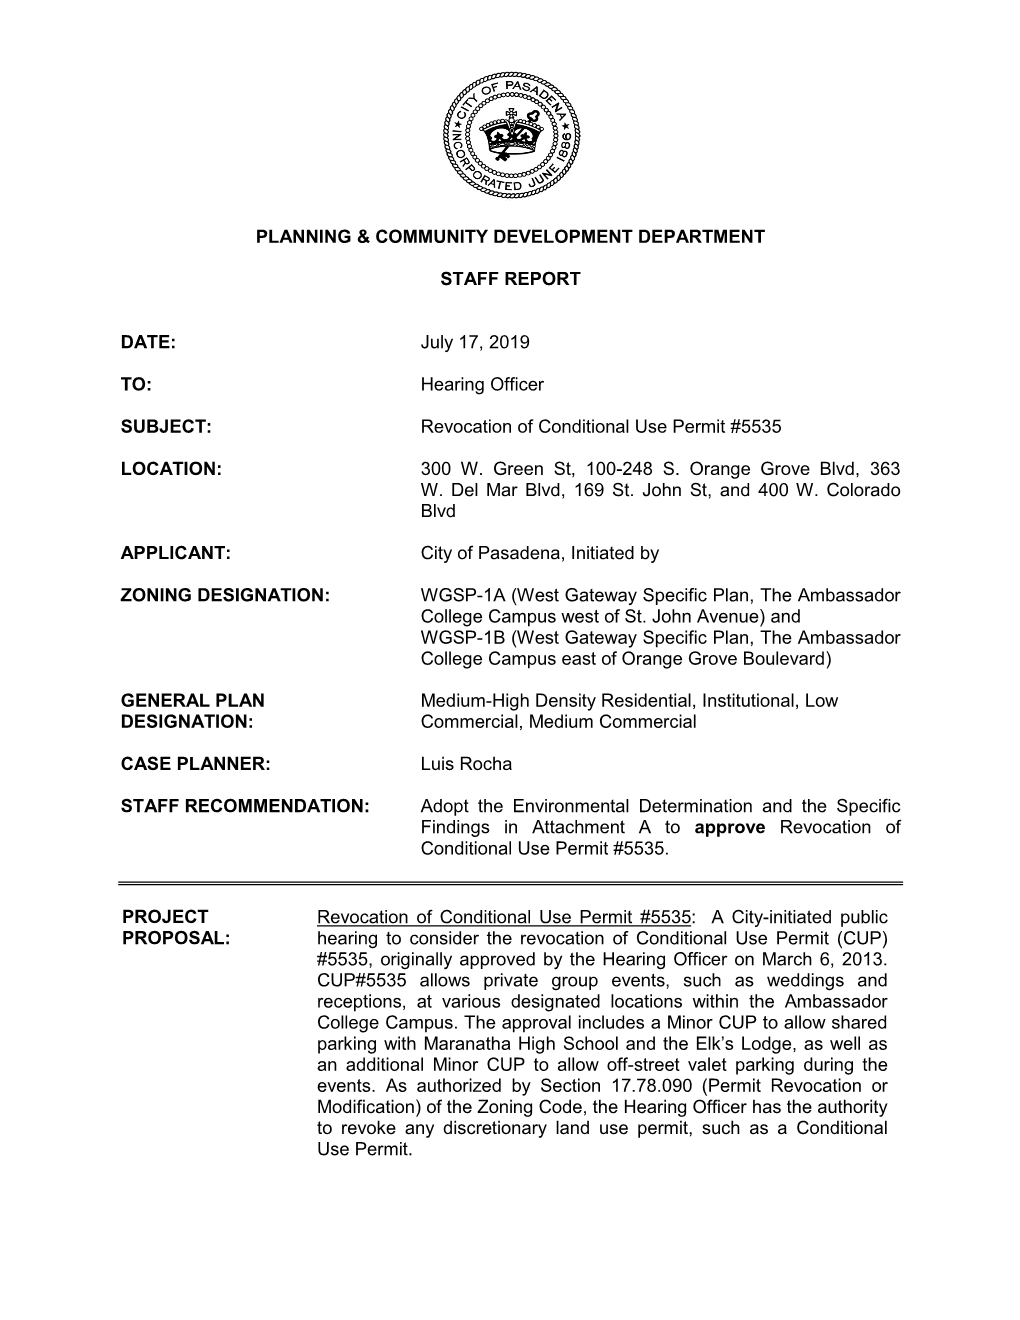 PLANNING & COMMUNITY DEVELOPMENT DEPARTMENT STAFF REPORT DATE: July 17, 2019 TO: Hearing Officer SUBJECT: Revocation of Cond